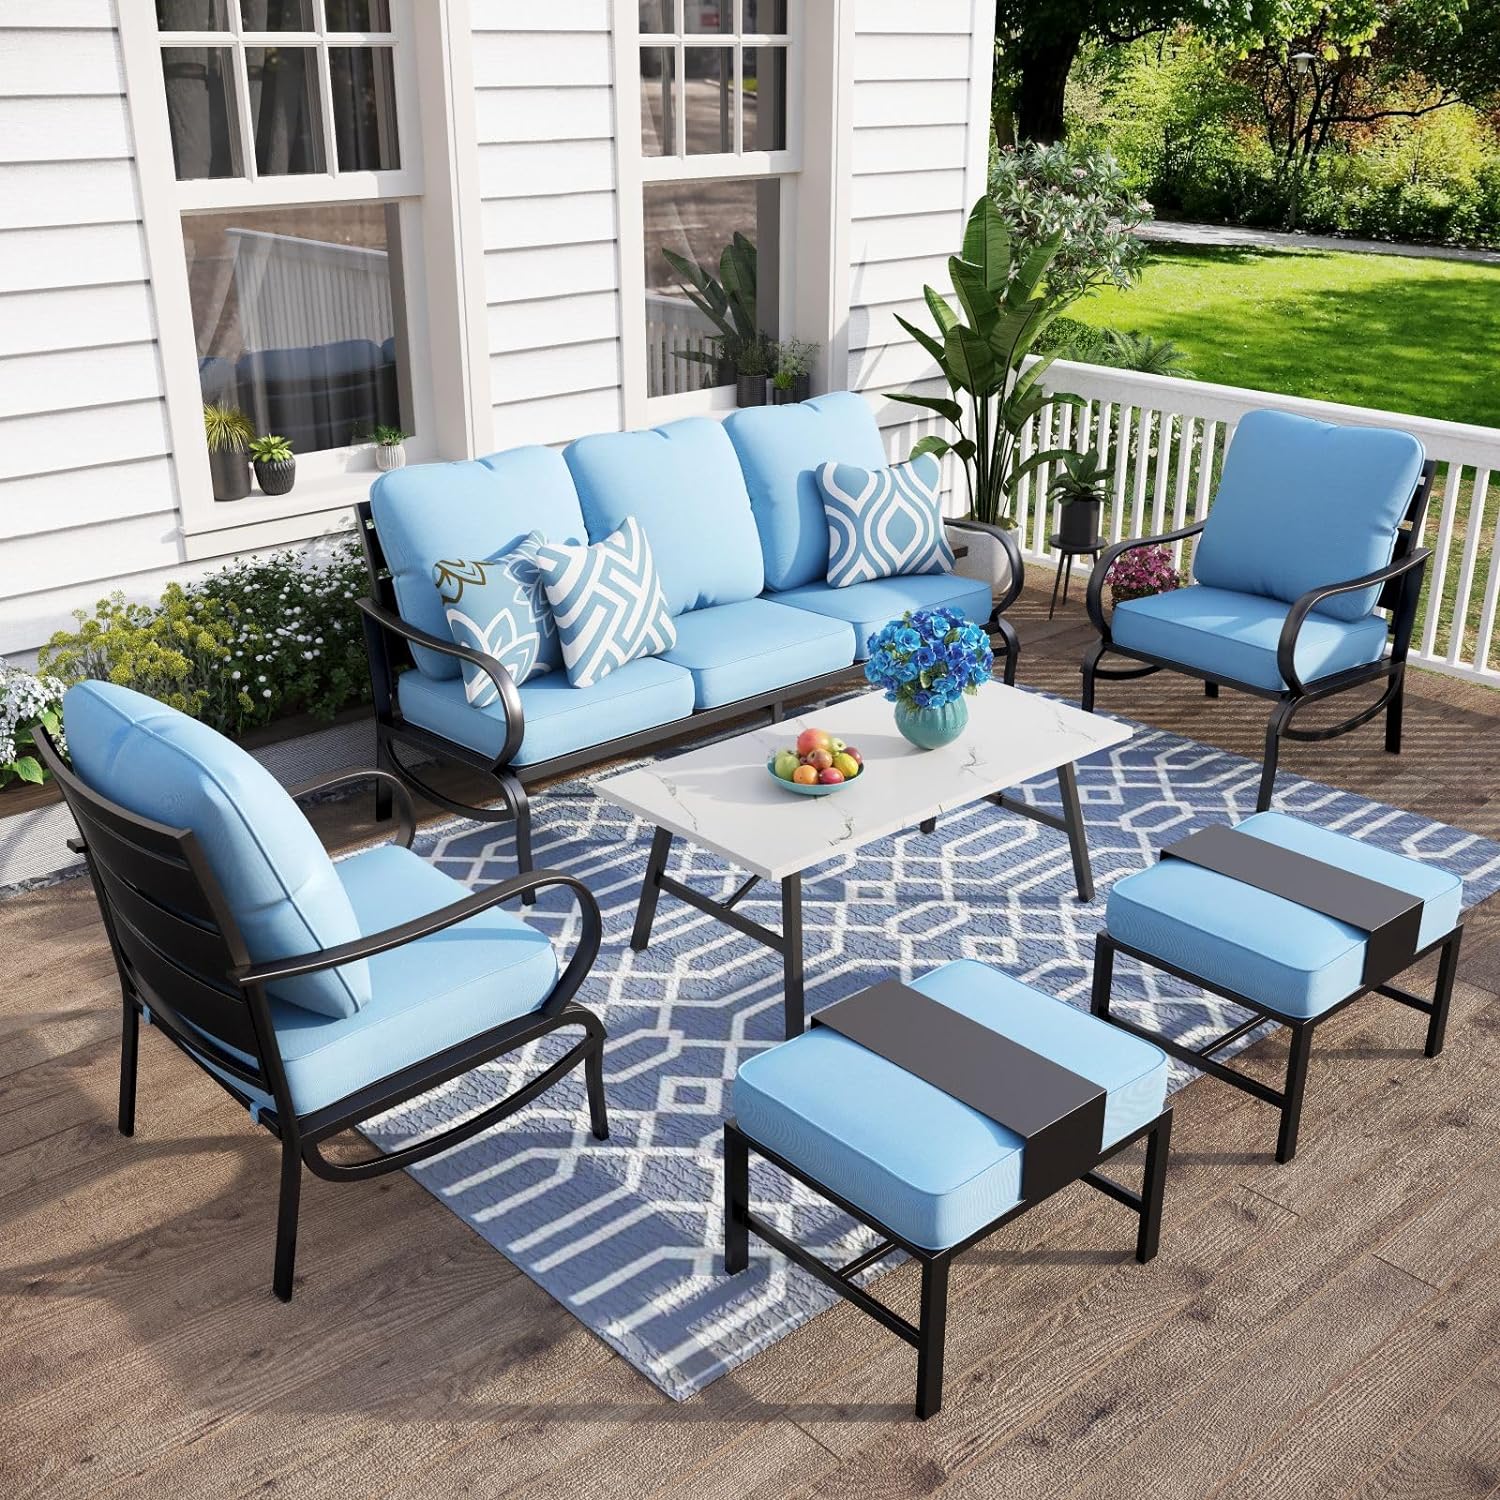 MFSTUDIO 6 Pieces Patio Conversation Sets(7 Seat),Outdoor Metal Furniture Sofas with 1 x 3-Seat Sofa, 2 Single Chairs,2 Ottoman and & 1 Coffee Table,Wrought Iron Frame with Blue Cushion